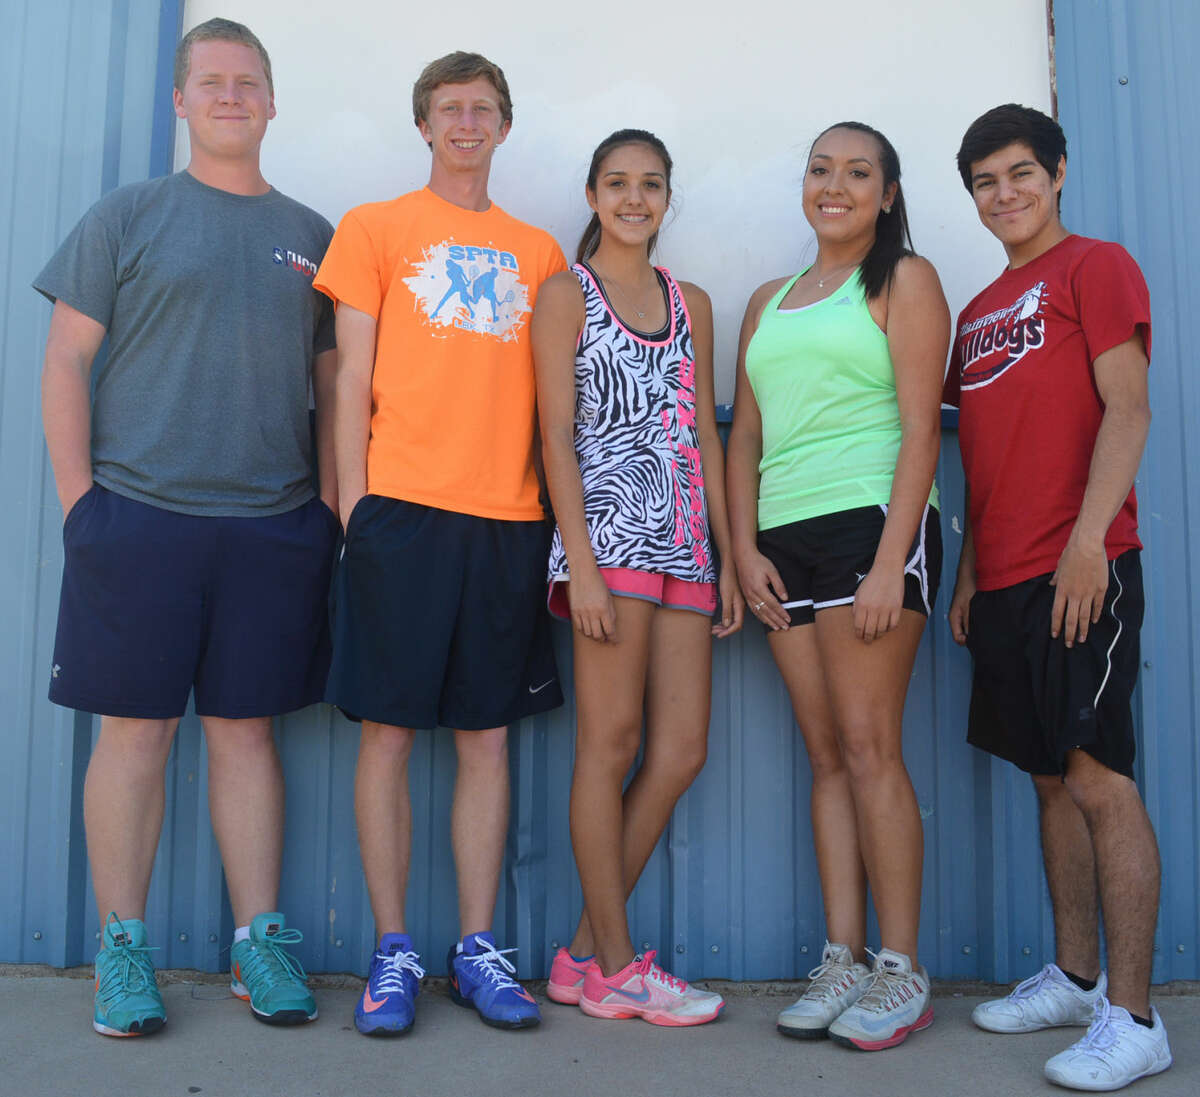 Senior tennis players, from left, Jeremy Bowen, Travis Reid, Kayla Campos, Giselle Medina and Roman Perez will lead the Plainview netters into the playoffs for the second consecutive season. The Bulldogs will take on Randall in the area round at 9 a.m. Wednesday in Lubbock.